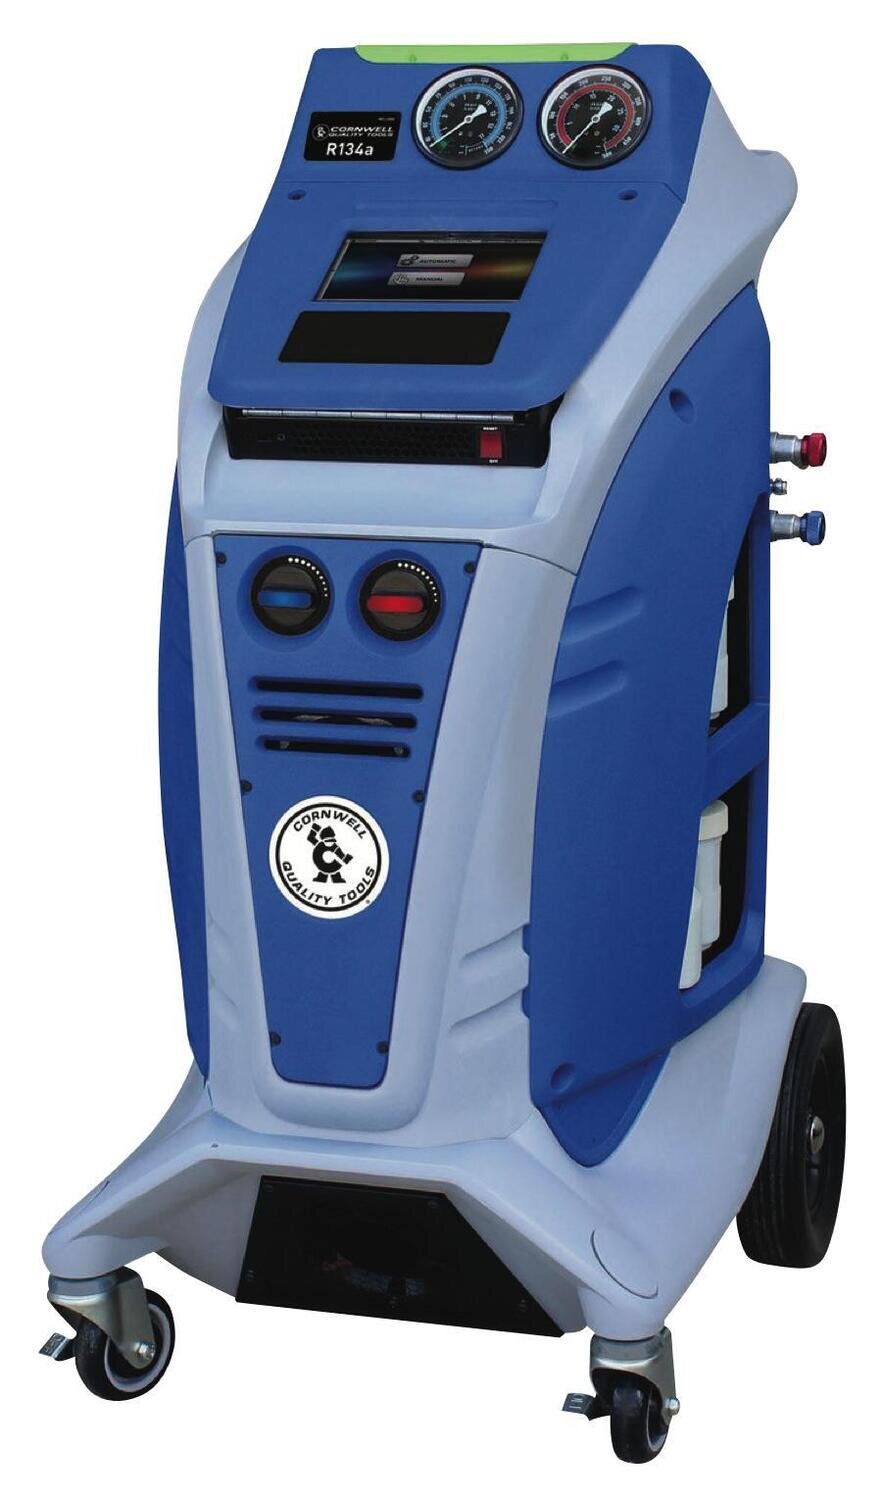 MCL2000 - R134a Automatic Recovery, Recycle, Recharge Machine